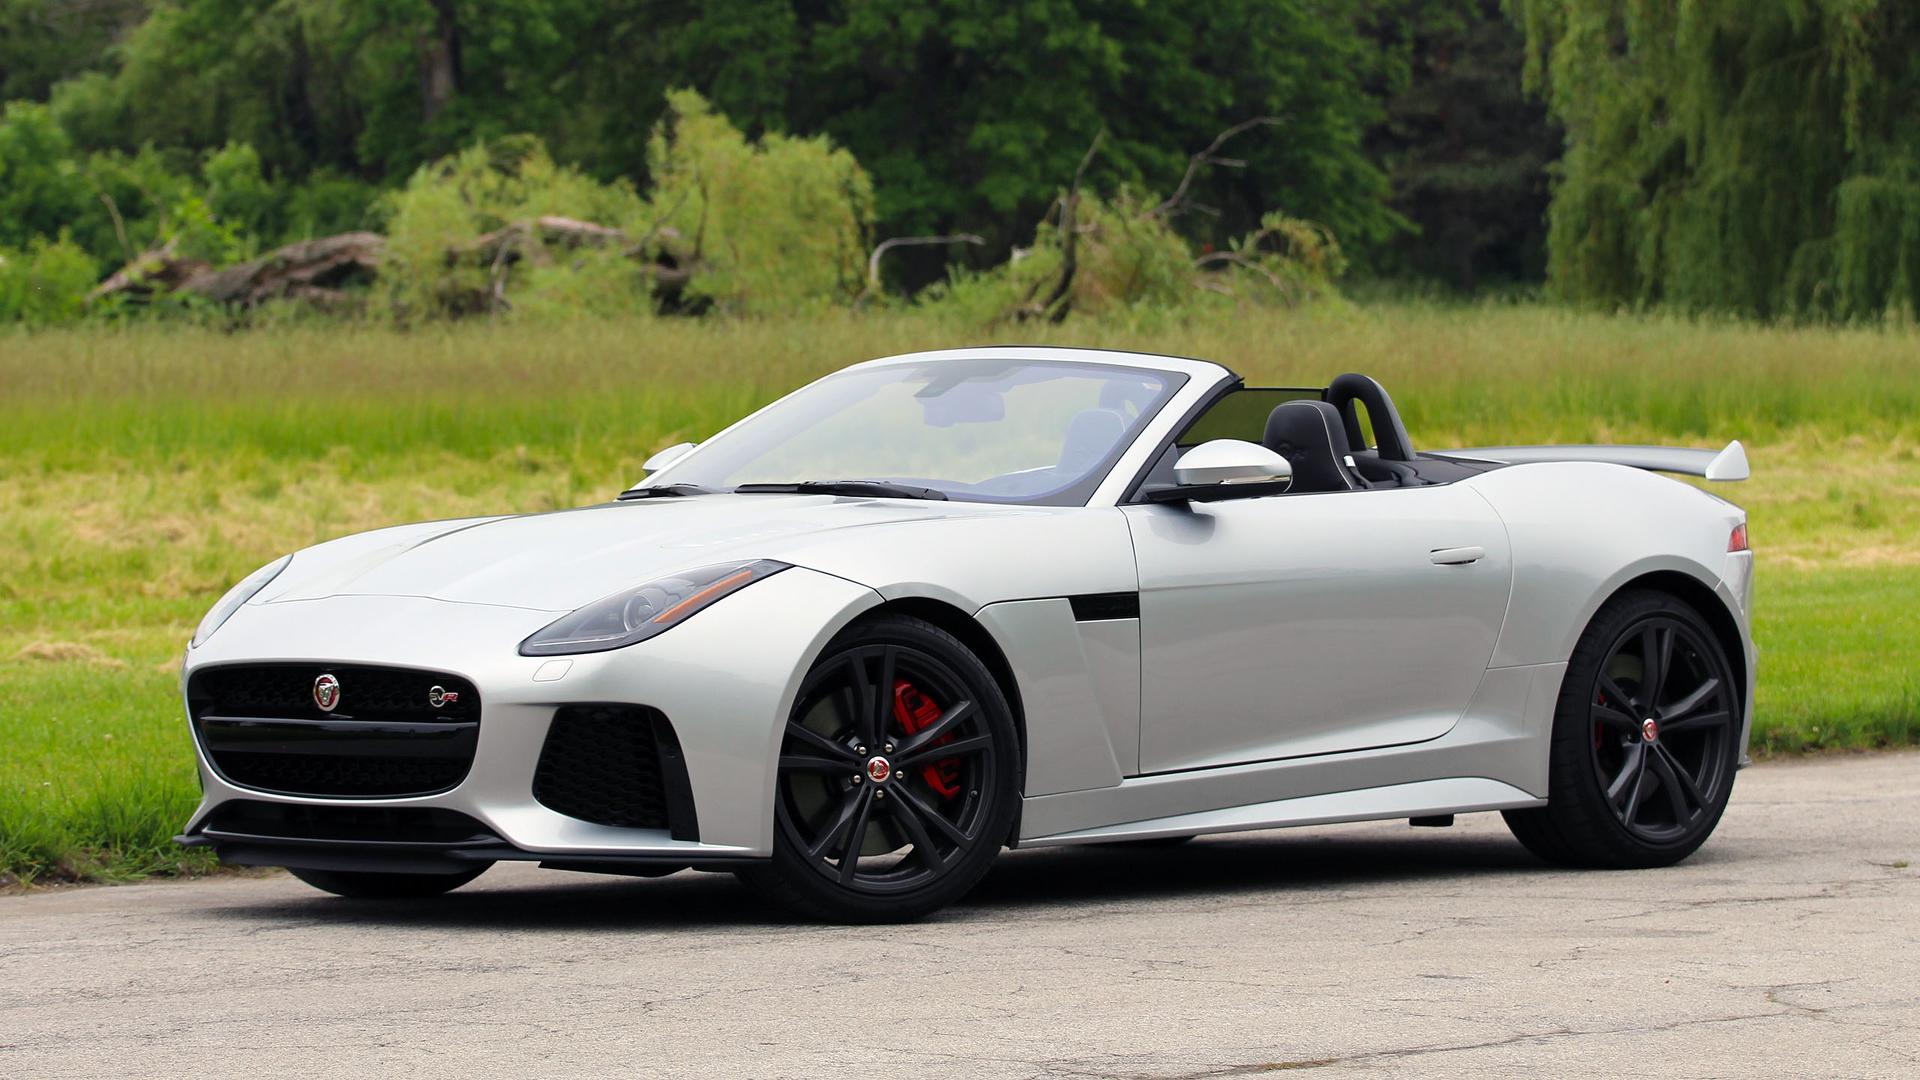 2017 Jaguar F-Type SVR Convertible Review: Why It's Better To Go Topless